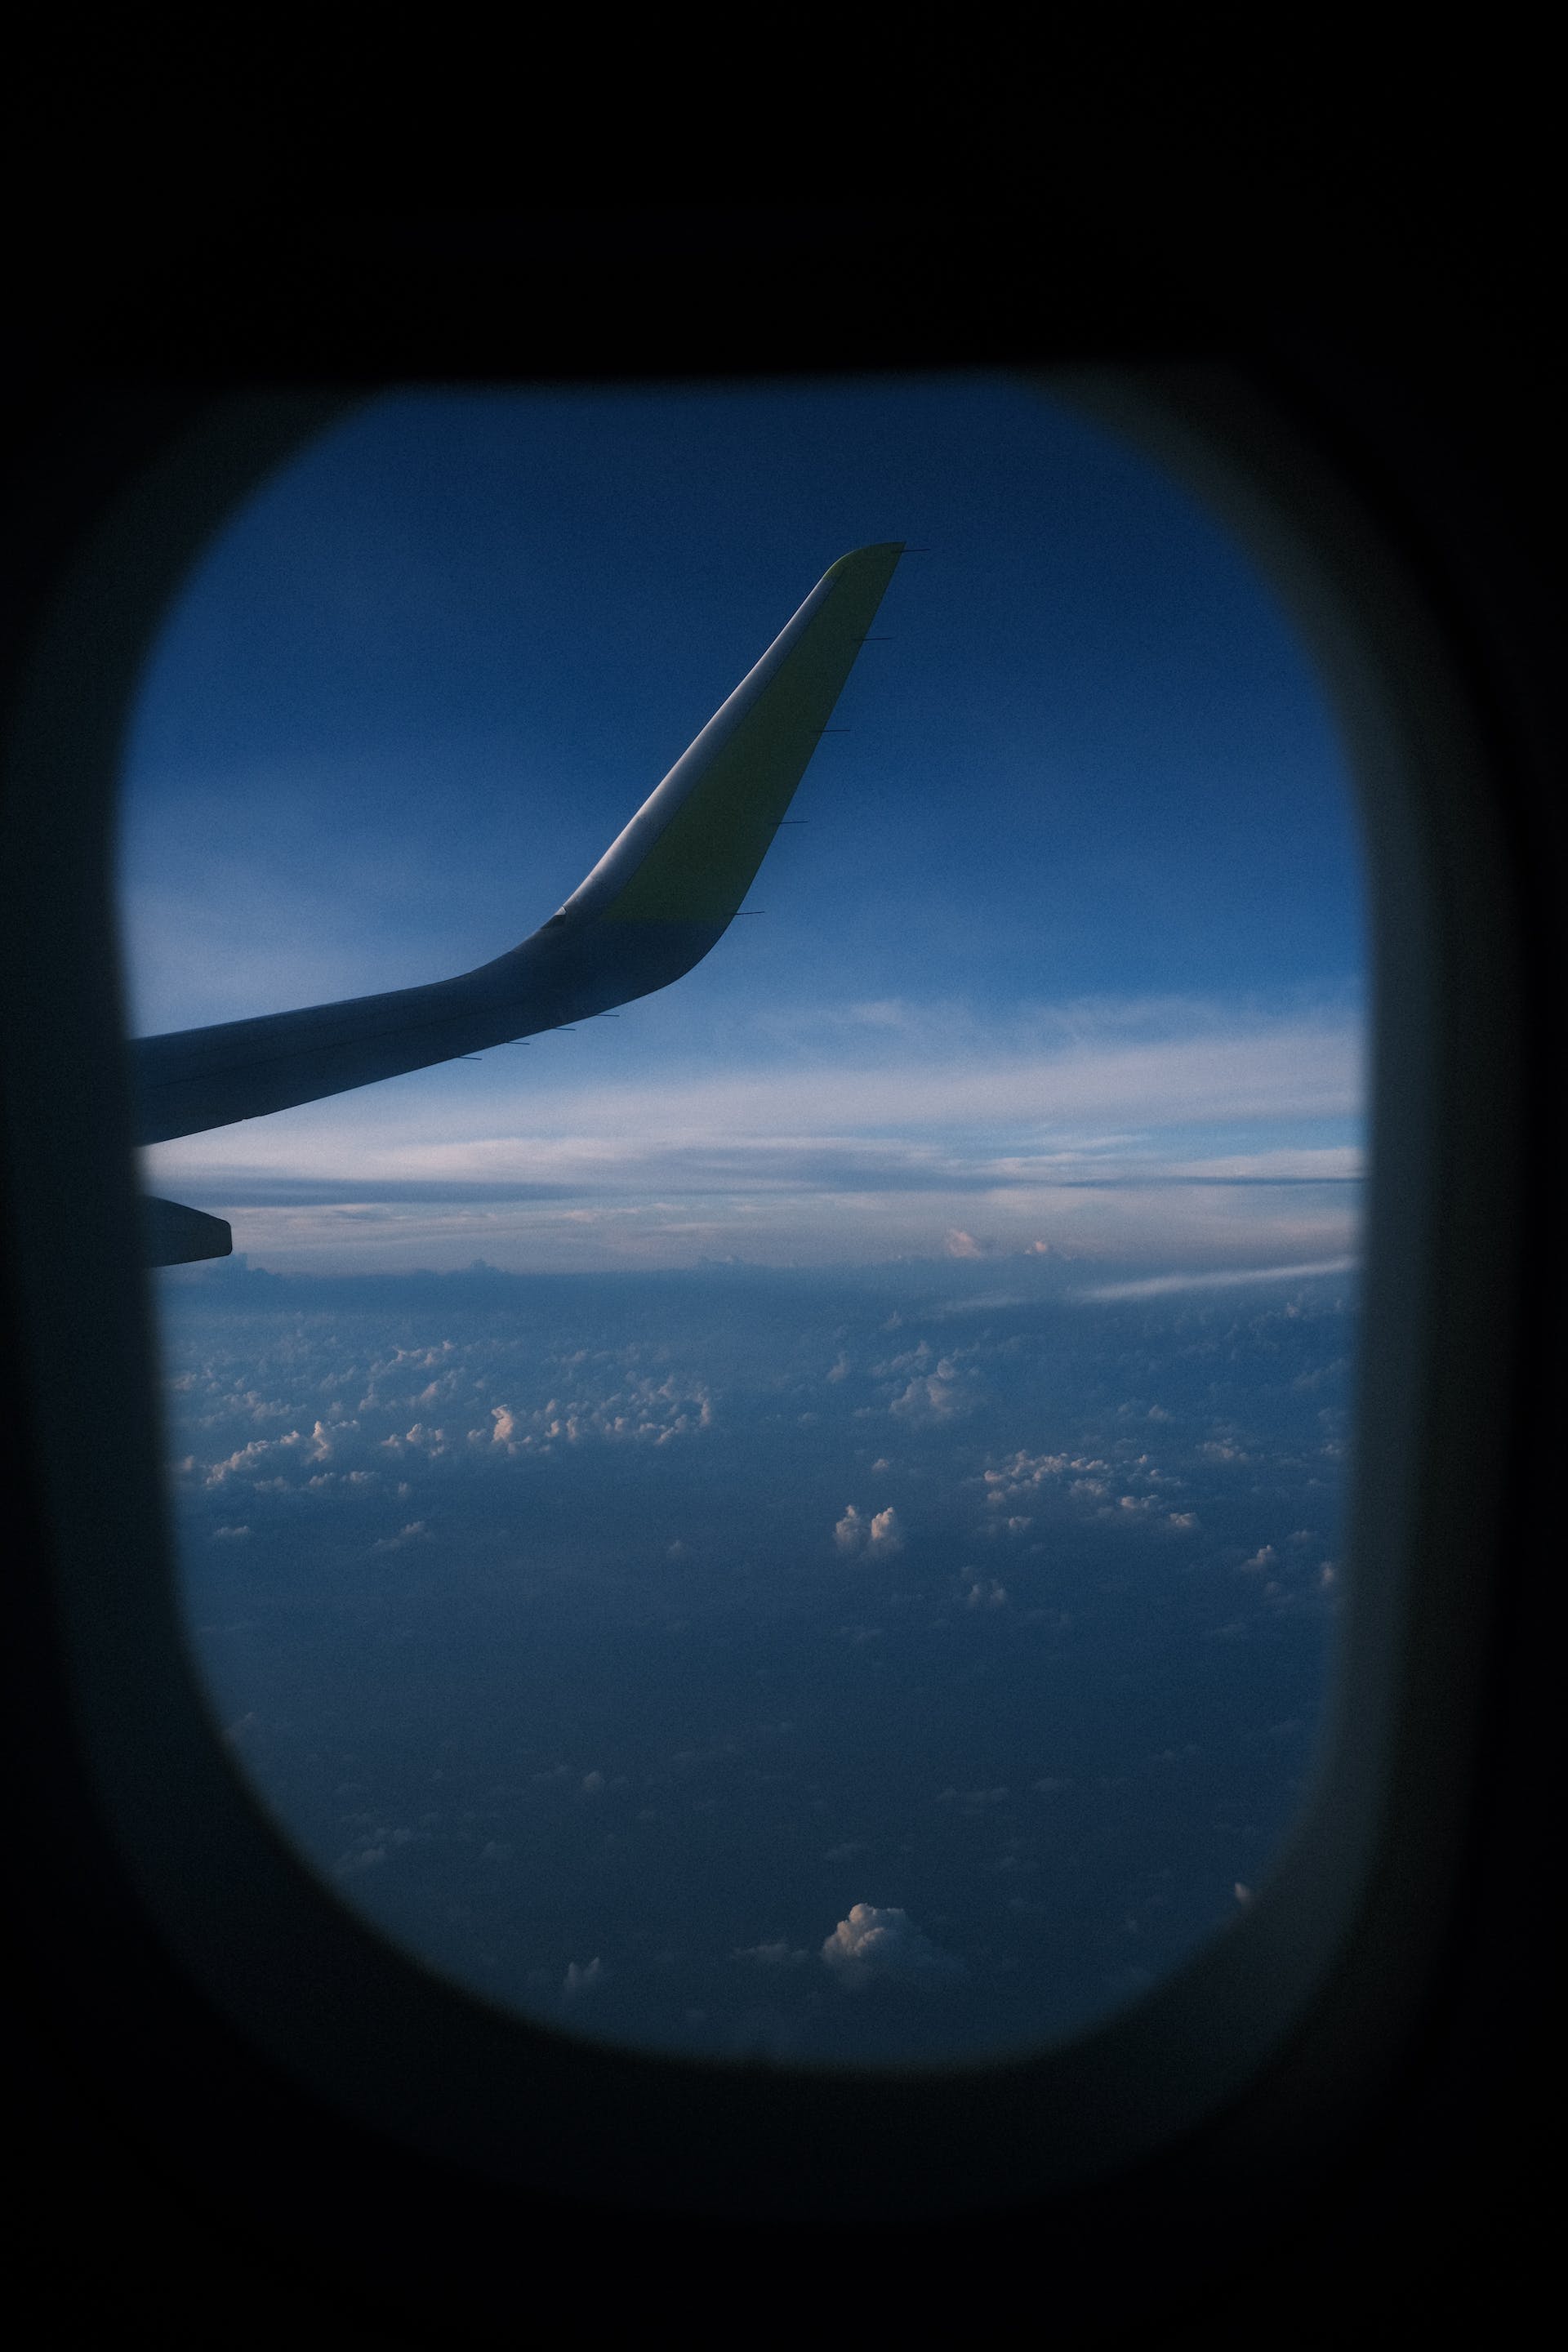 View from an airplane window | Source: Pexels